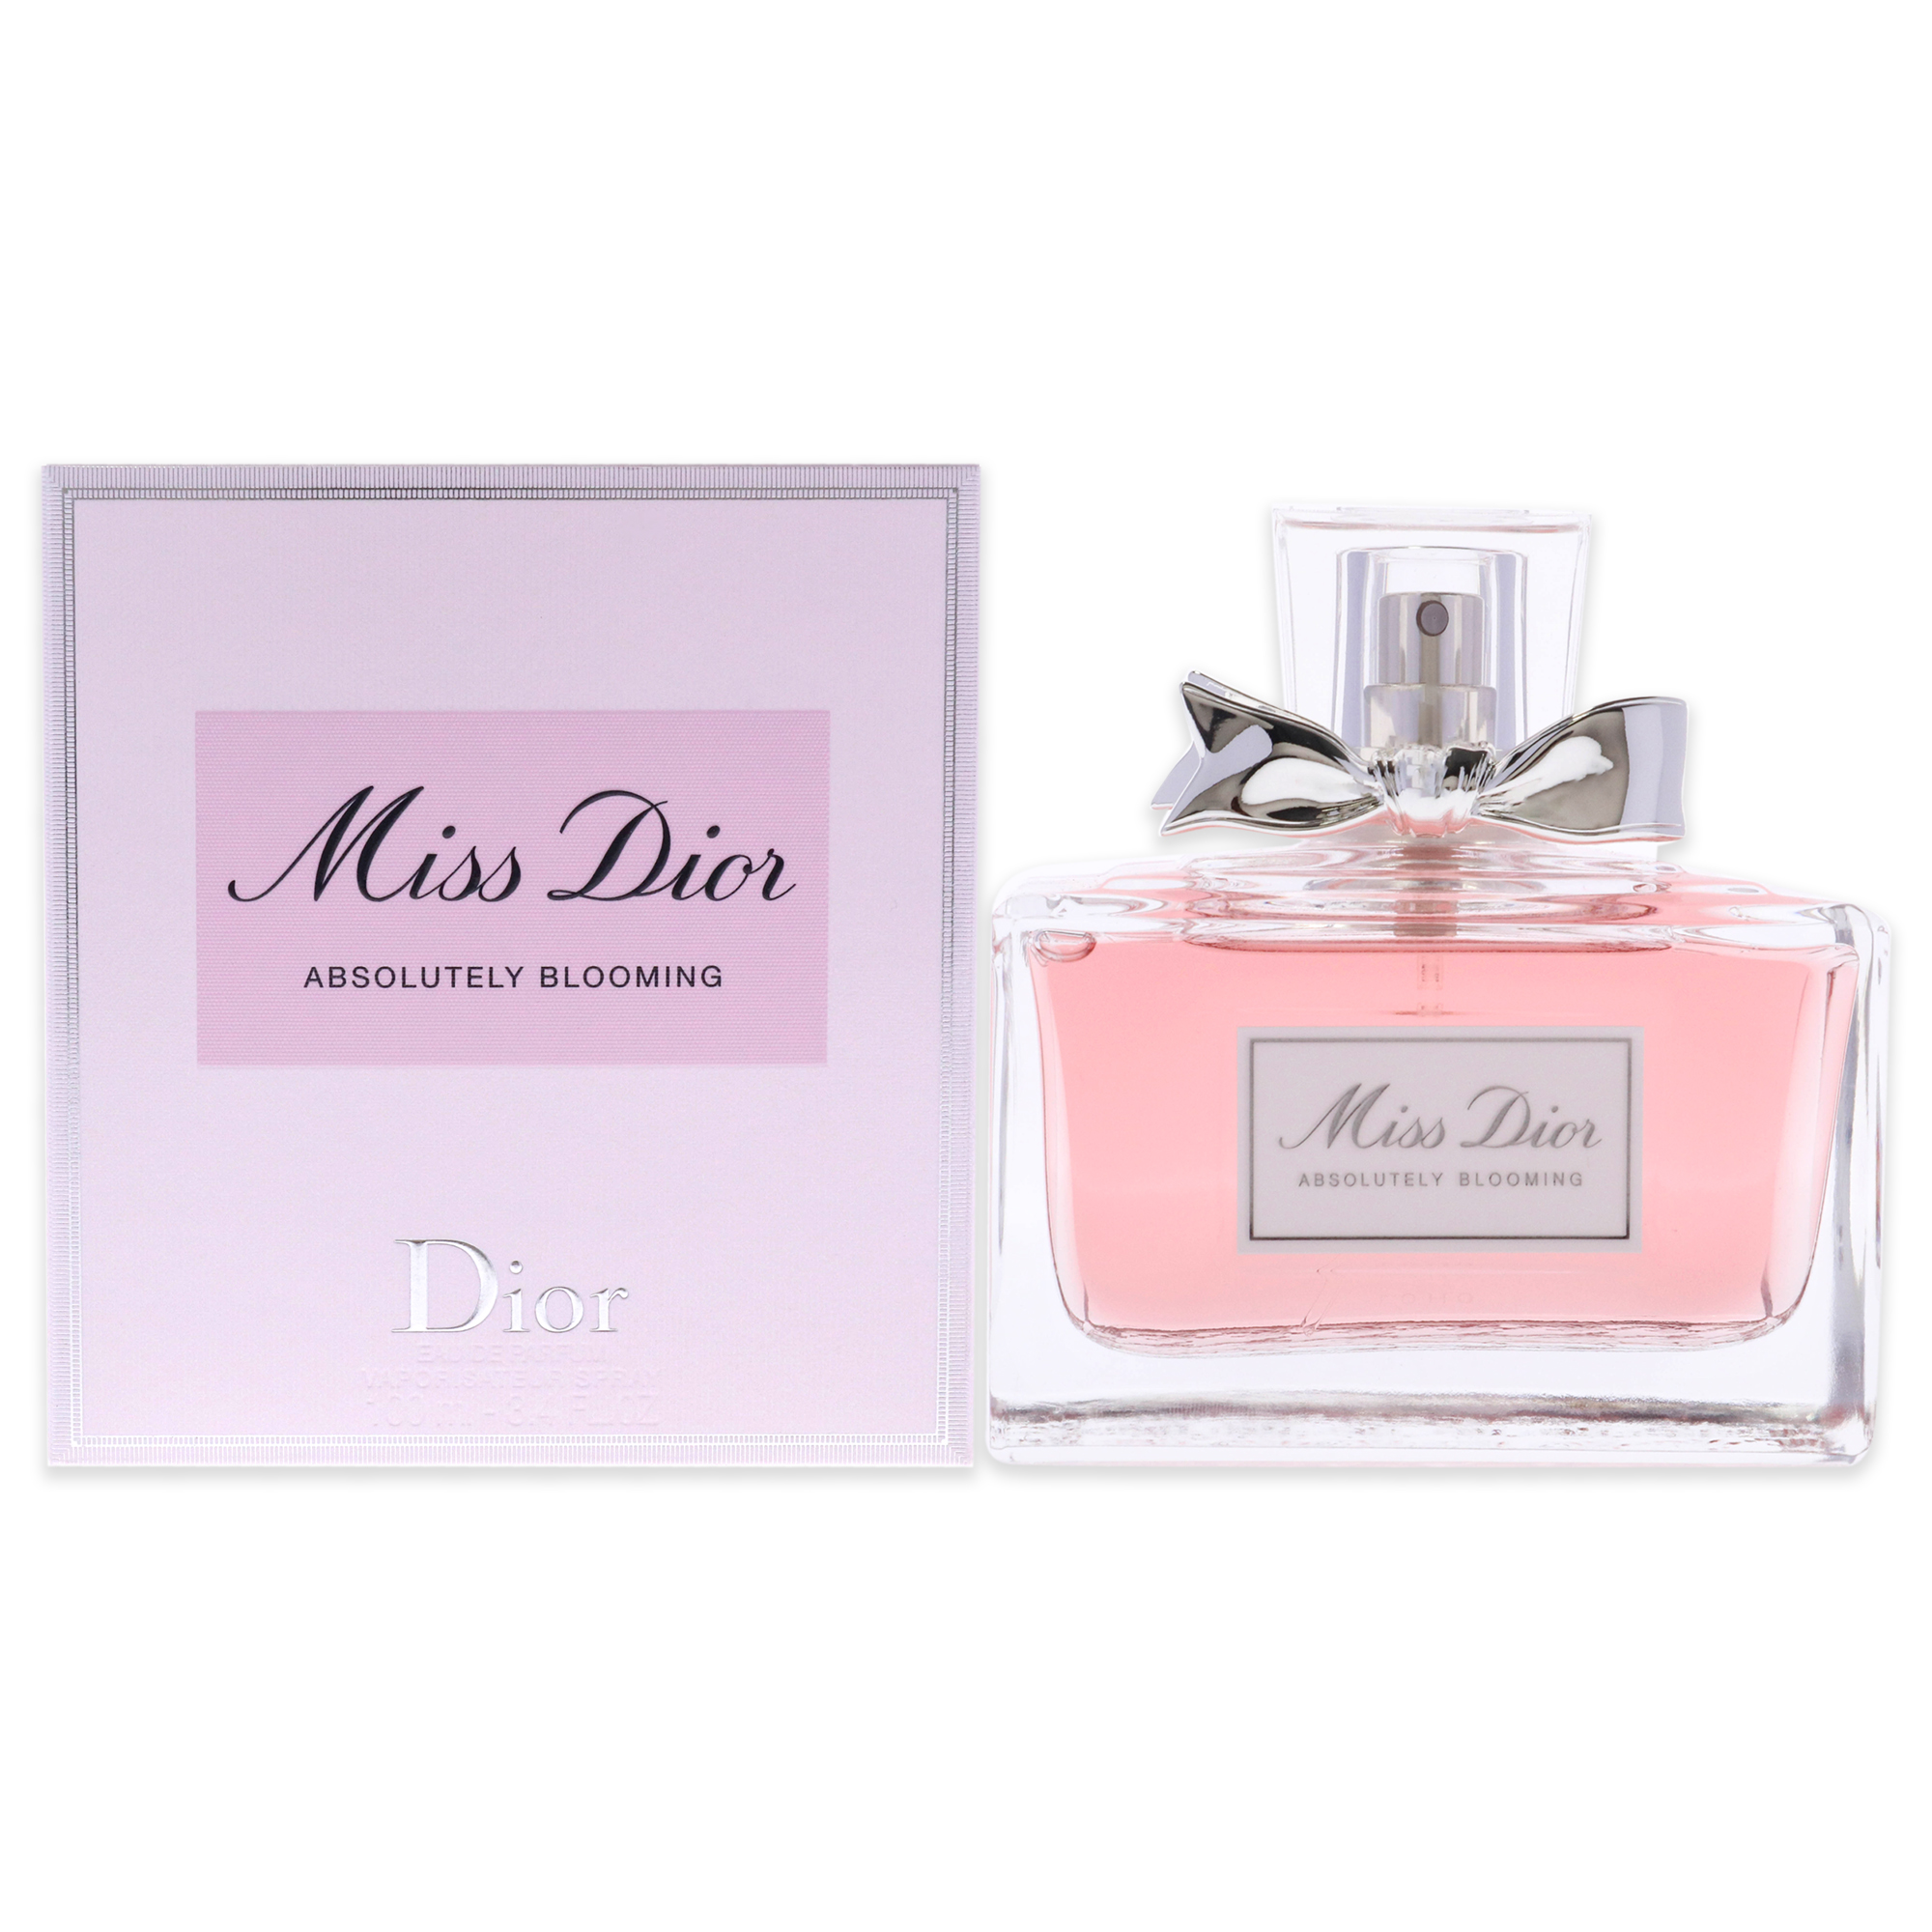 Dior Miss Dior Absolutely Blooming Eau de Parfum, Perfume for Women, 3.4 Oz - image 1 of 2